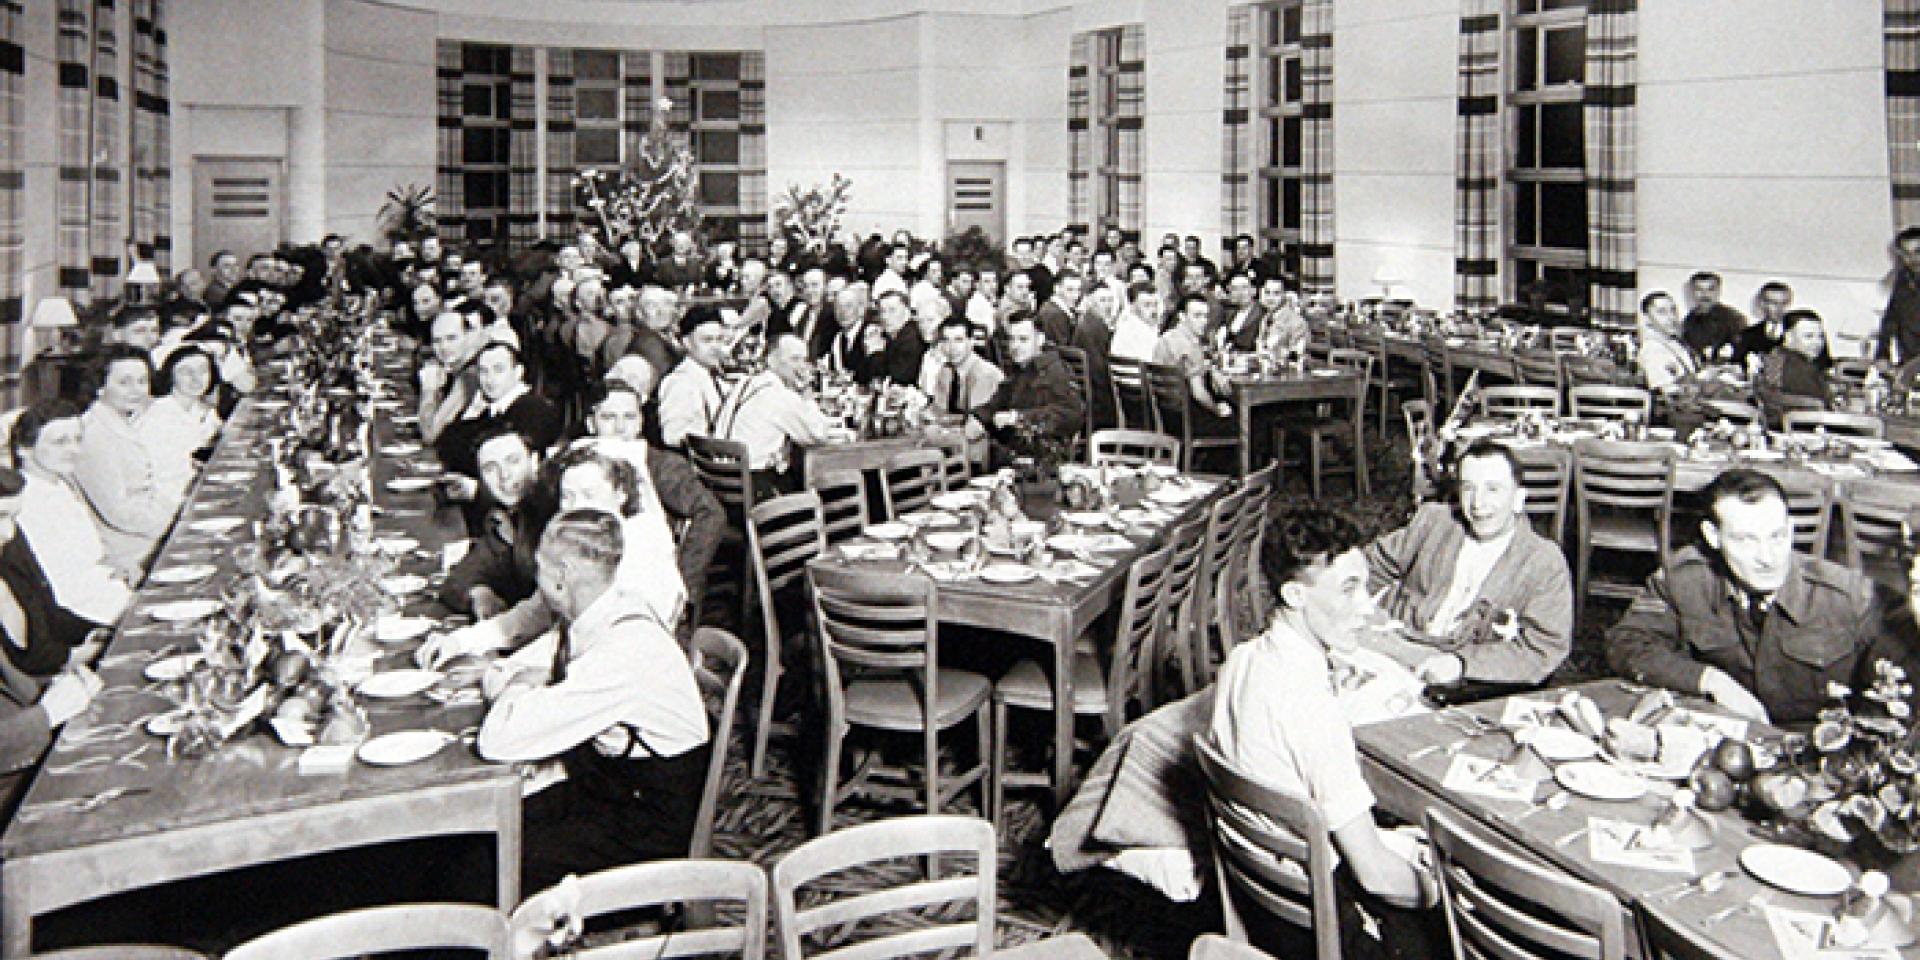 WWII Veterans holiday celebration during the 1940s